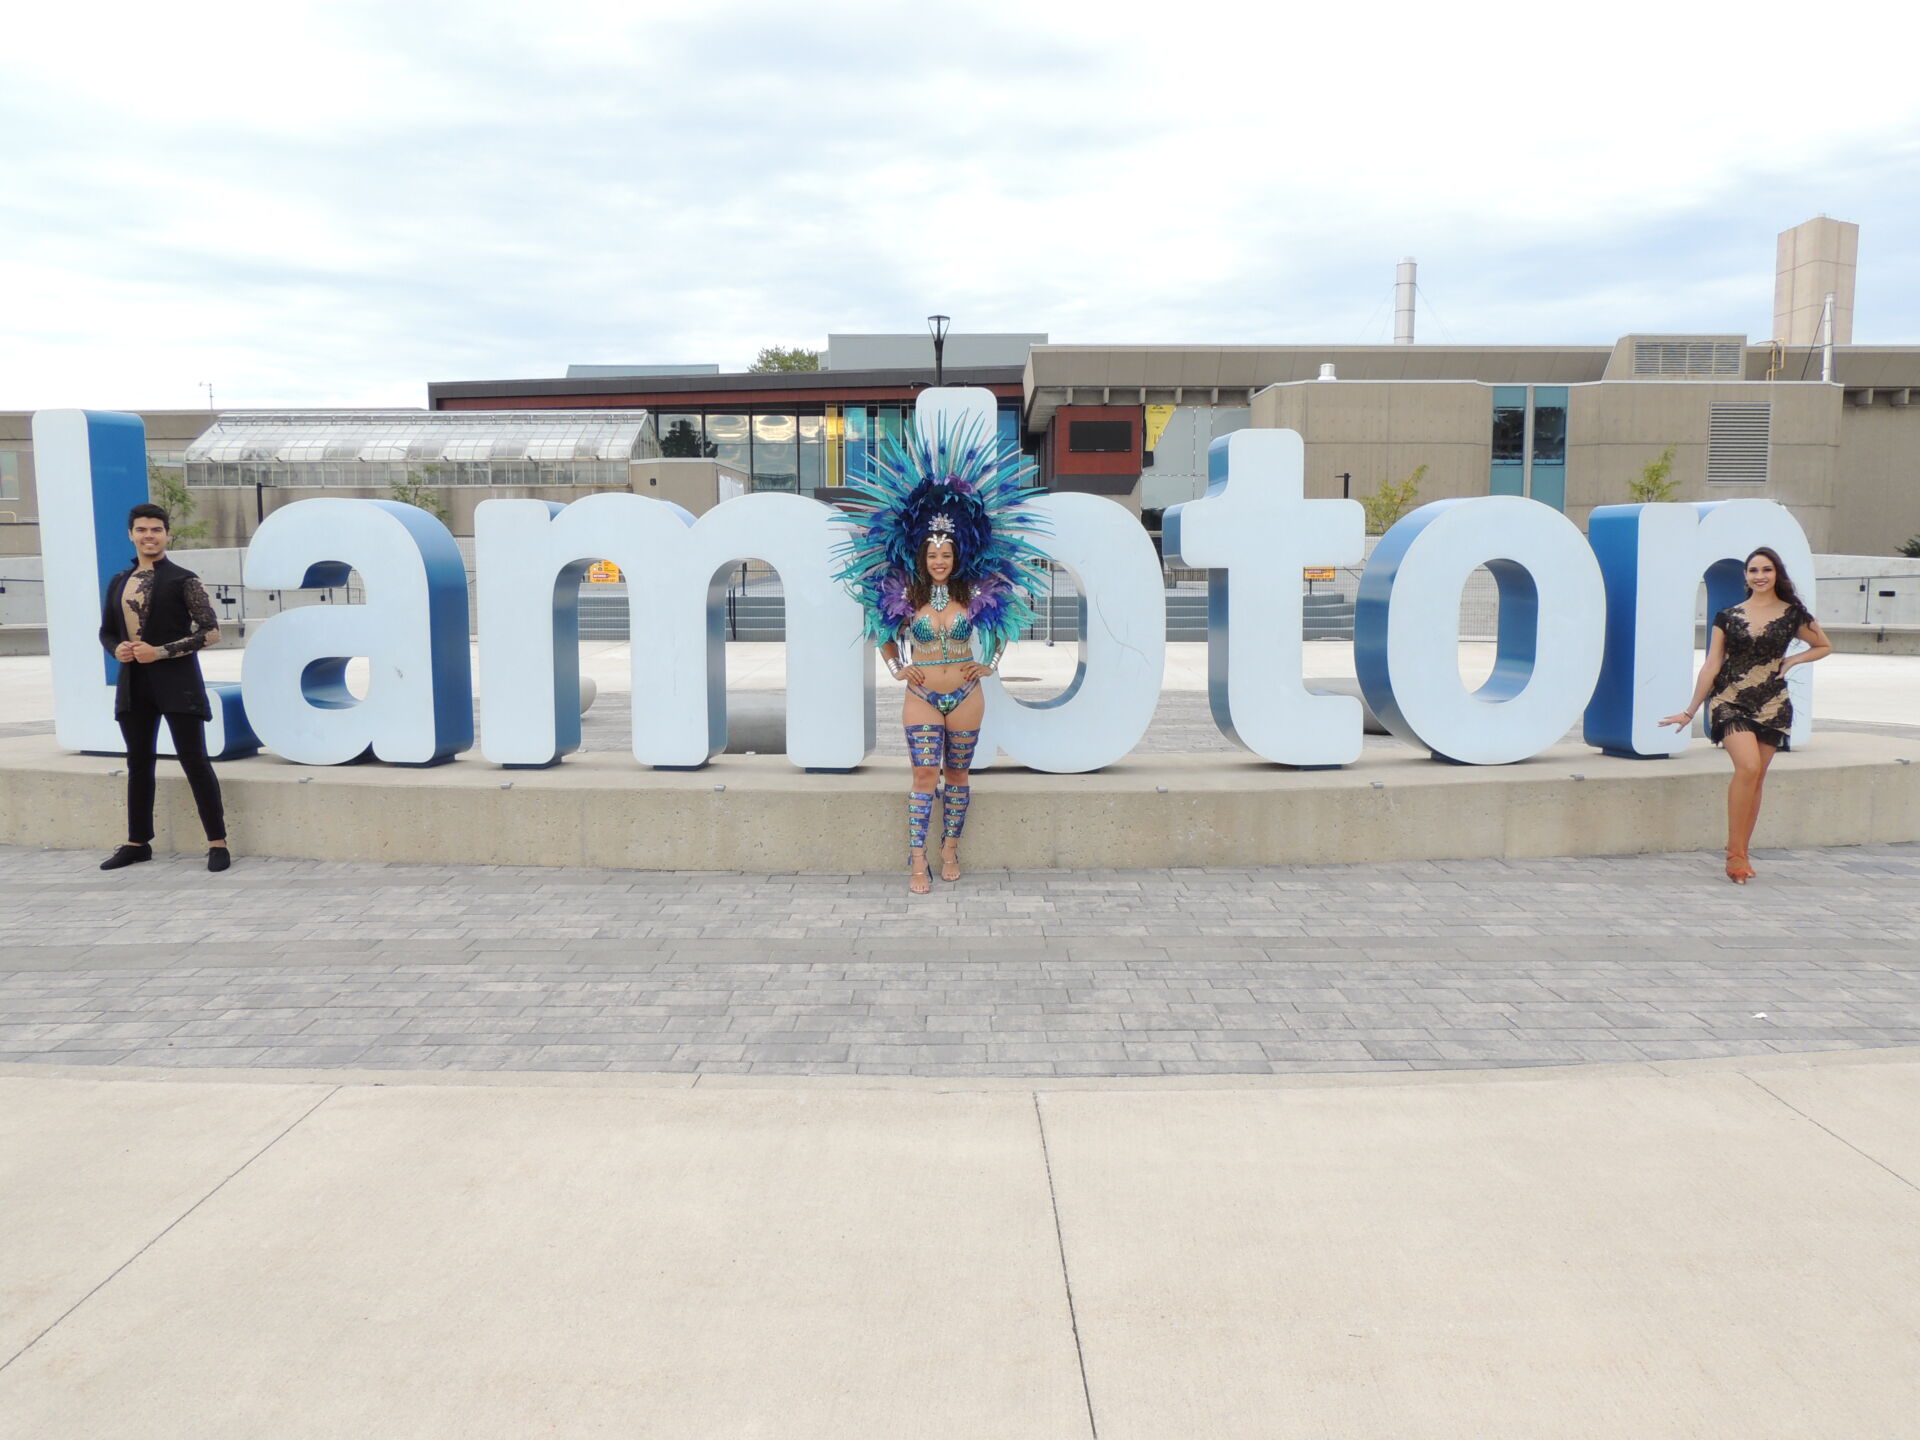 CaribeFest performers in front of Lambton college sign